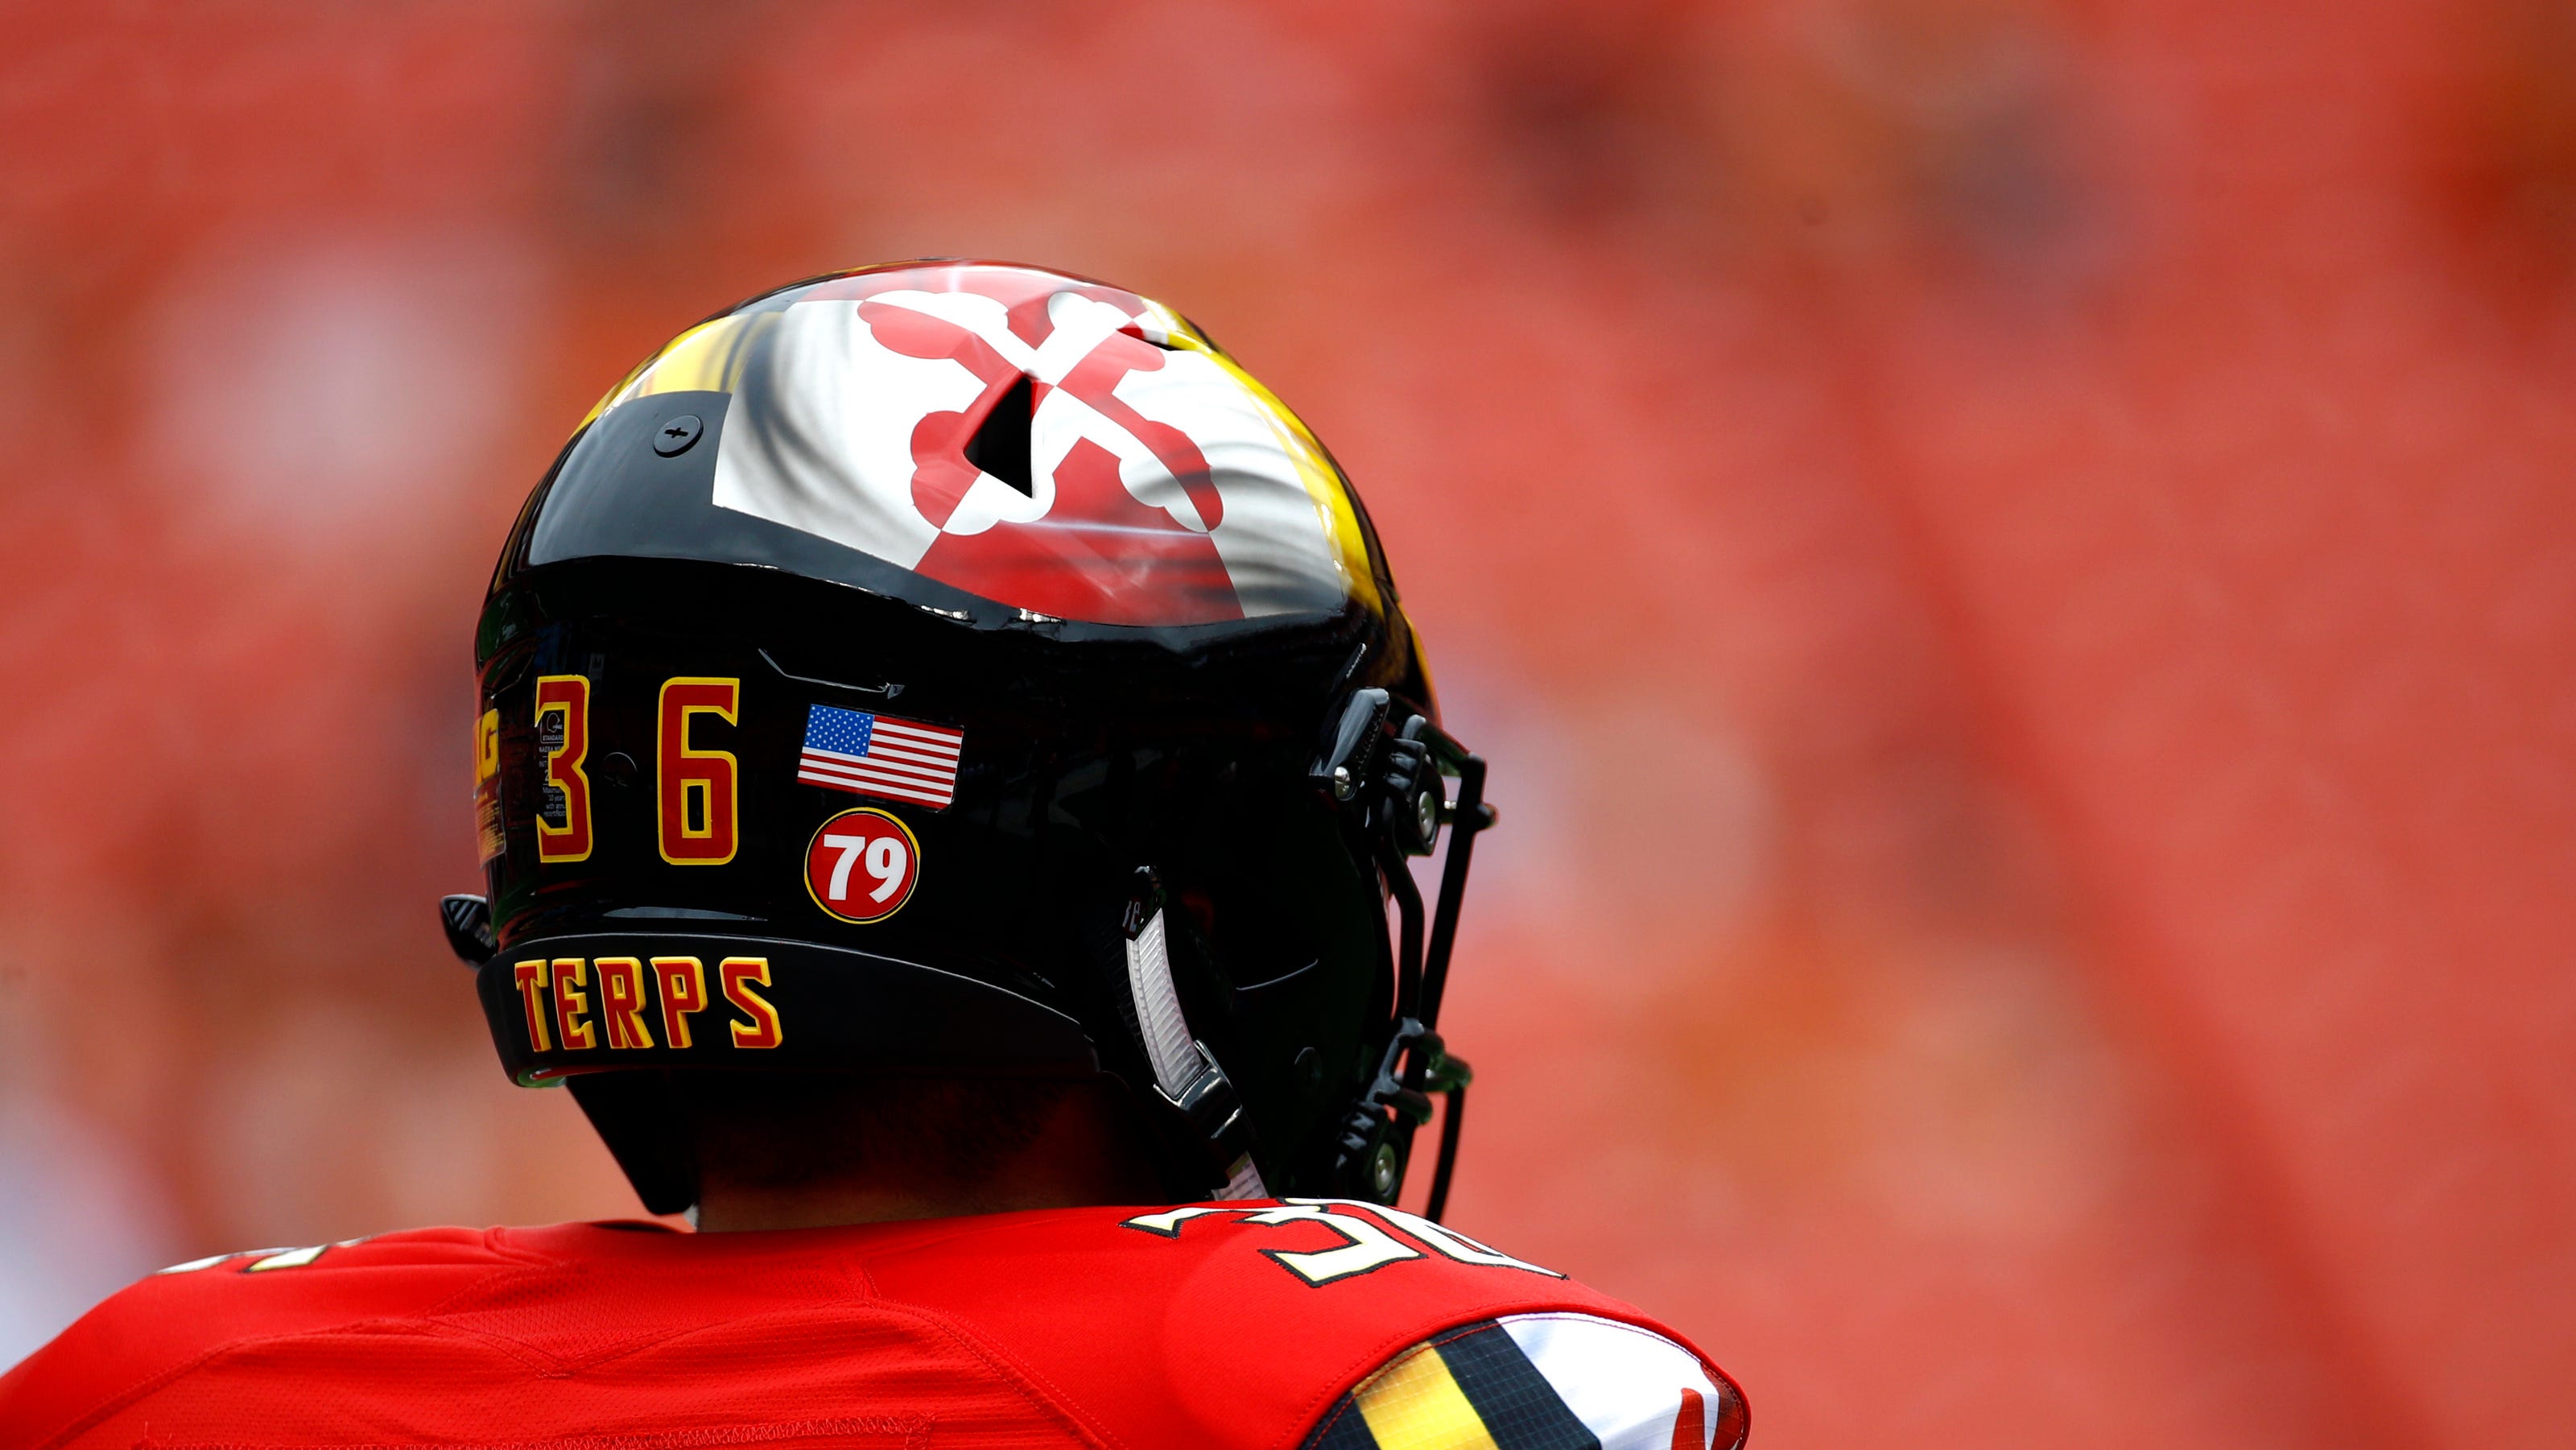 Maryland Lines Up With 10 Men To Honor Fallen Teammate